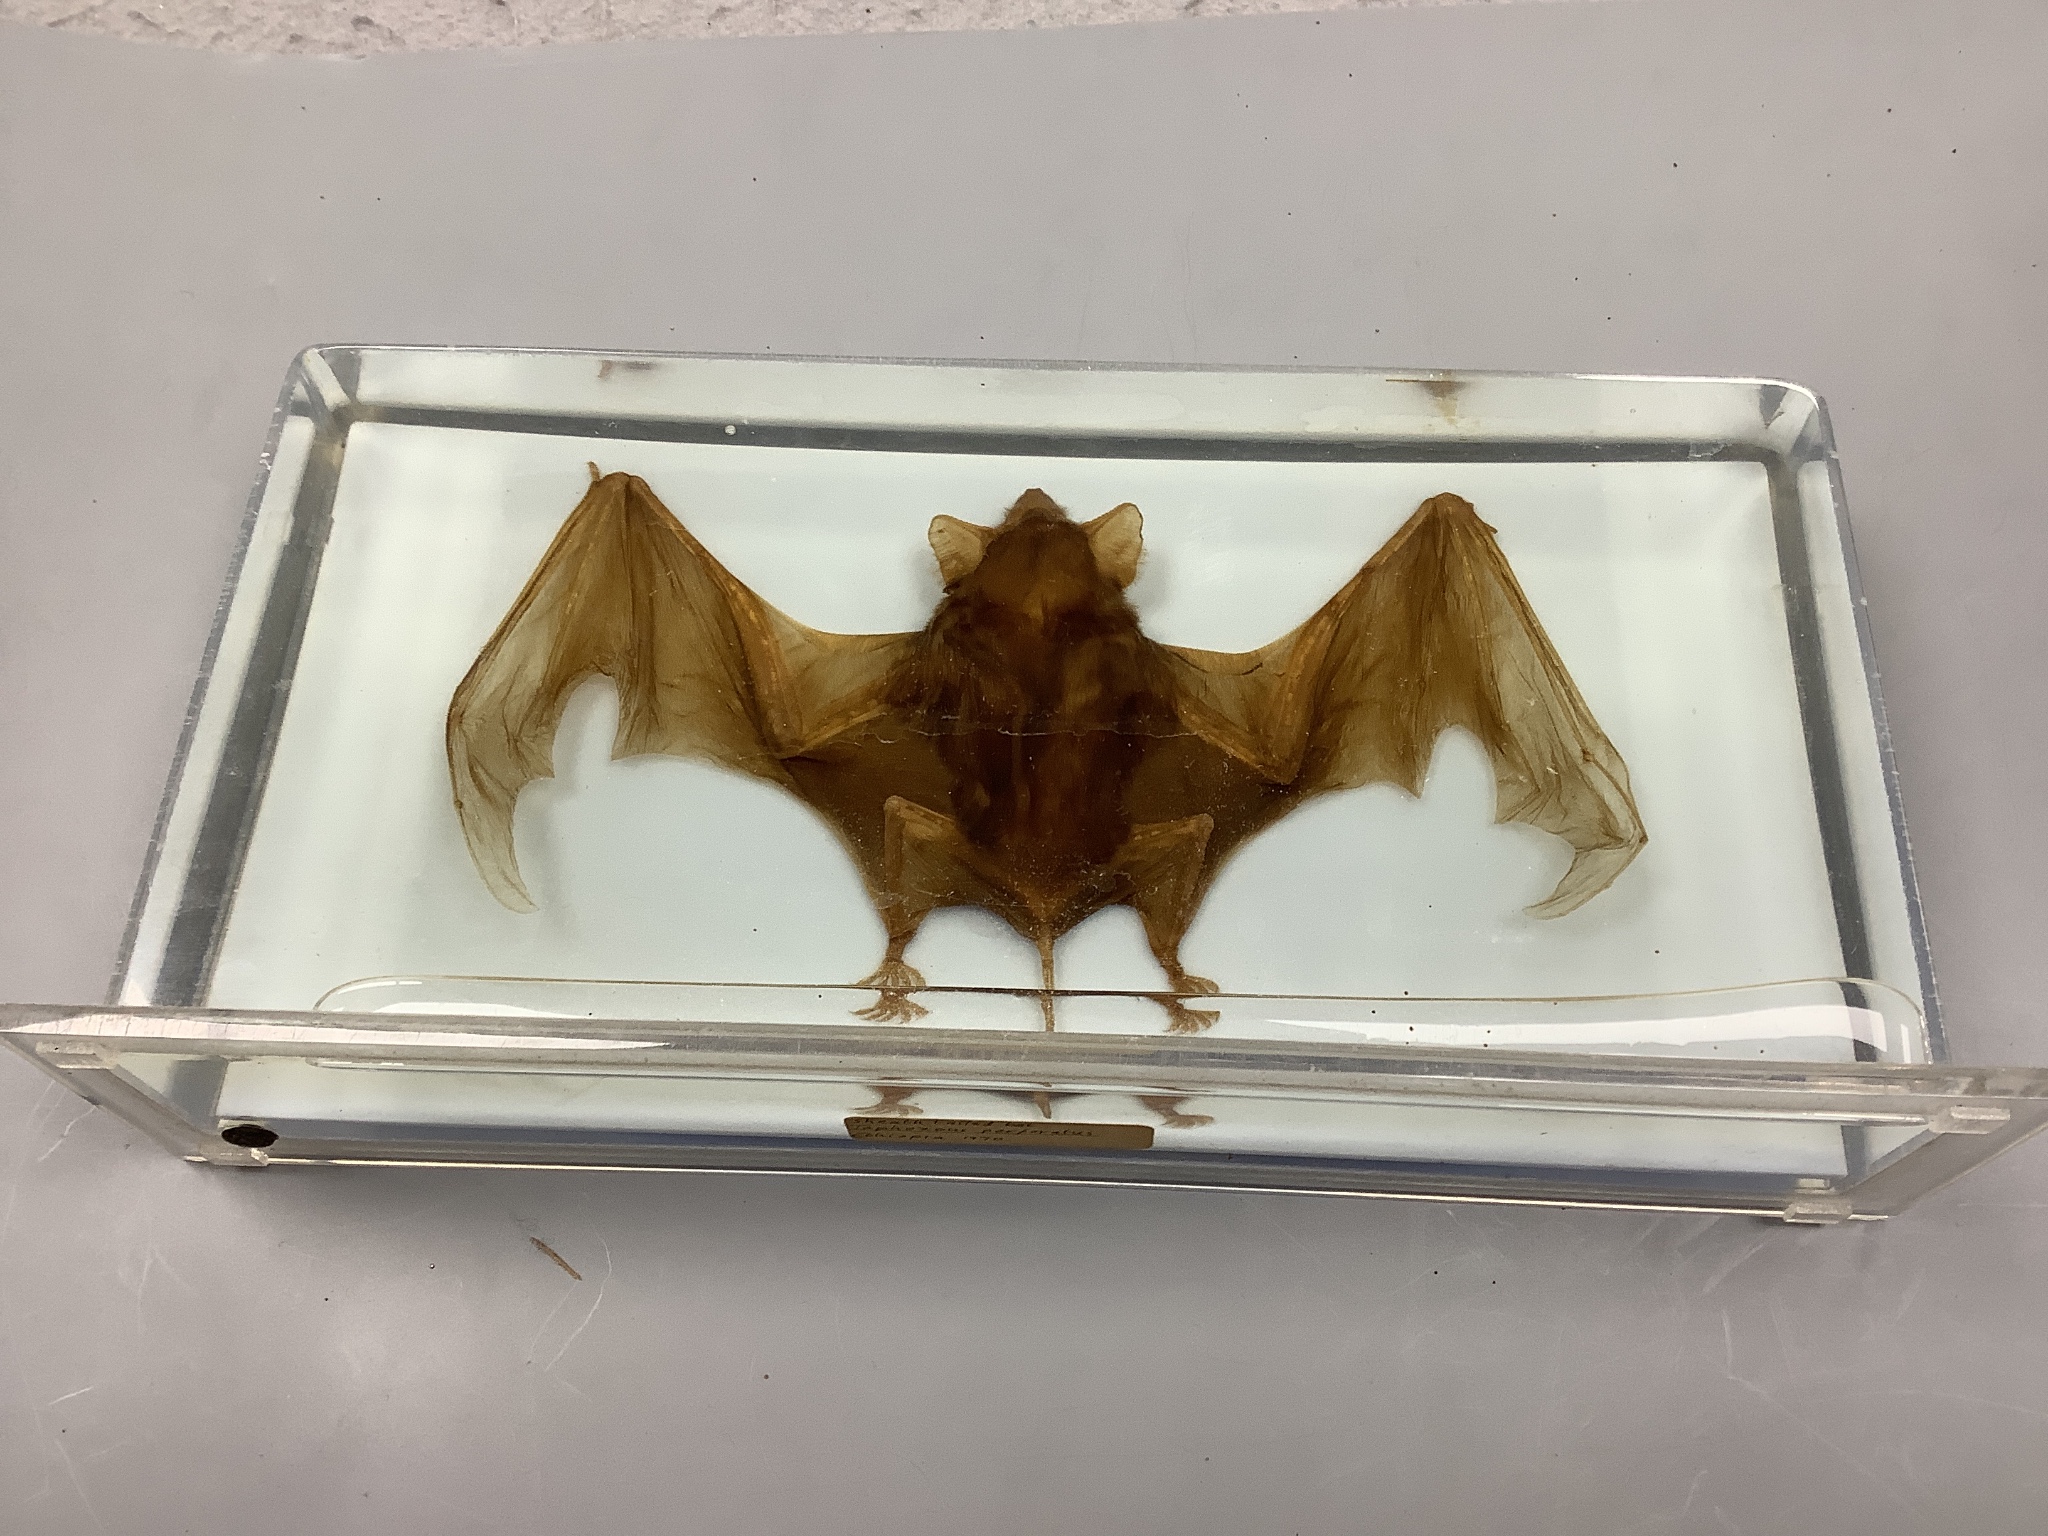 Entomology and Herpetology - a collection of insects, scorpions, spiders, a turtle, a snake in acrylic slabs, a horseshoe crab, and a cased wet specimen African sheath tailed bat, 27 cm wide